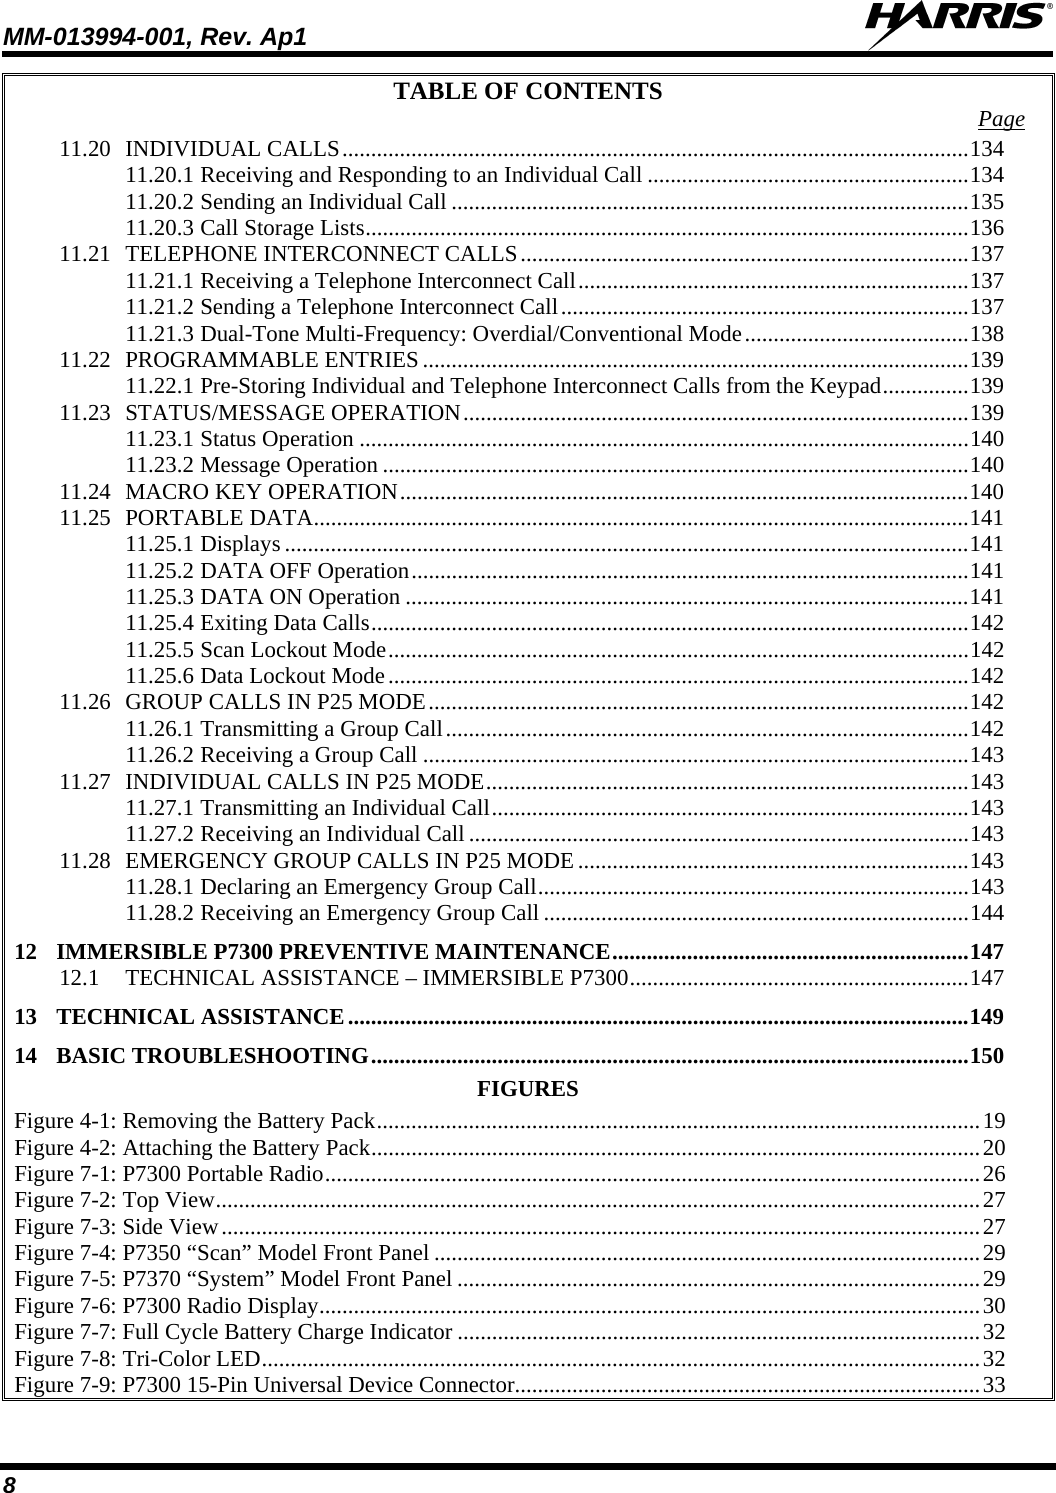 MM-013994-001, Rev. Ap1  8 TABLE OF CONTENTS  Page 11.20 INDIVIDUAL CALLS.............................................................................................................134 11.20.1 Receiving and Responding to an Individual Call ........................................................134 11.20.2 Sending an Individual Call ..........................................................................................135 11.20.3 Call Storage Lists.........................................................................................................136 11.21 TELEPHONE INTERCONNECT CALLS..............................................................................137 11.21.1 Receiving a Telephone Interconnect Call....................................................................137 11.21.2 Sending a Telephone Interconnect Call.......................................................................137 11.21.3 Dual-Tone Multi-Frequency: Overdial/Conventional Mode.......................................138 11.22 PROGRAMMABLE ENTRIES...............................................................................................139 11.22.1 Pre-Storing Individual and Telephone Interconnect Calls from the Keypad...............139 11.23 STATUS/MESSAGE OPERATION........................................................................................139 11.23.1 Status Operation ..........................................................................................................140 11.23.2 Message Operation ......................................................................................................140 11.24 MACRO KEY OPERATION...................................................................................................140 11.25 PORTABLE DATA..................................................................................................................141 11.25.1 Displays .......................................................................................................................141 11.25.2 DATA OFF Operation.................................................................................................141 11.25.3 DATA ON Operation ..................................................................................................141 11.25.4 Exiting Data Calls........................................................................................................142 11.25.5 Scan Lockout Mode.....................................................................................................142 11.25.6 Data Lockout Mode.....................................................................................................142 11.26 GROUP CALLS IN P25 MODE..............................................................................................142 11.26.1 Transmitting a Group Call...........................................................................................142 11.26.2 Receiving a Group Call ...............................................................................................143 11.27 INDIVIDUAL CALLS IN P25 MODE....................................................................................143 11.27.1 Transmitting an Individual Call...................................................................................143 11.27.2 Receiving an Individual Call .......................................................................................143 11.28 EMERGENCY GROUP CALLS IN P25 MODE....................................................................143 11.28.1 Declaring an Emergency Group Call...........................................................................143 11.28.2 Receiving an Emergency Group Call ..........................................................................144 12 IMMERSIBLE P7300 PREVENTIVE MAINTENANCE..............................................................147 12.1 TECHNICAL ASSISTANCE – IMMERSIBLE P7300...........................................................147 13 TECHNICAL ASSISTANCE............................................................................................................149 14 BASIC TROUBLESHOOTING........................................................................................................150 FIGURES Figure 4-1: Removing the Battery Pack.........................................................................................................19 Figure 4-2: Attaching the Battery Pack..........................................................................................................20 Figure 7-1: P7300 Portable Radio..................................................................................................................26 Figure 7-2: Top View.....................................................................................................................................27 Figure 7-3: Side View....................................................................................................................................27 Figure 7-4: P7350 “Scan” Model Front Panel ...............................................................................................29 Figure 7-5: P7370 “System” Model Front Panel ...........................................................................................29 Figure 7-6: P7300 Radio Display...................................................................................................................30 Figure 7-7: Full Cycle Battery Charge Indicator ...........................................................................................32 Figure 7-8: Tri-Color LED.............................................................................................................................32 Figure 7-9: P7300 15-Pin Universal Device Connector.................................................................................33 